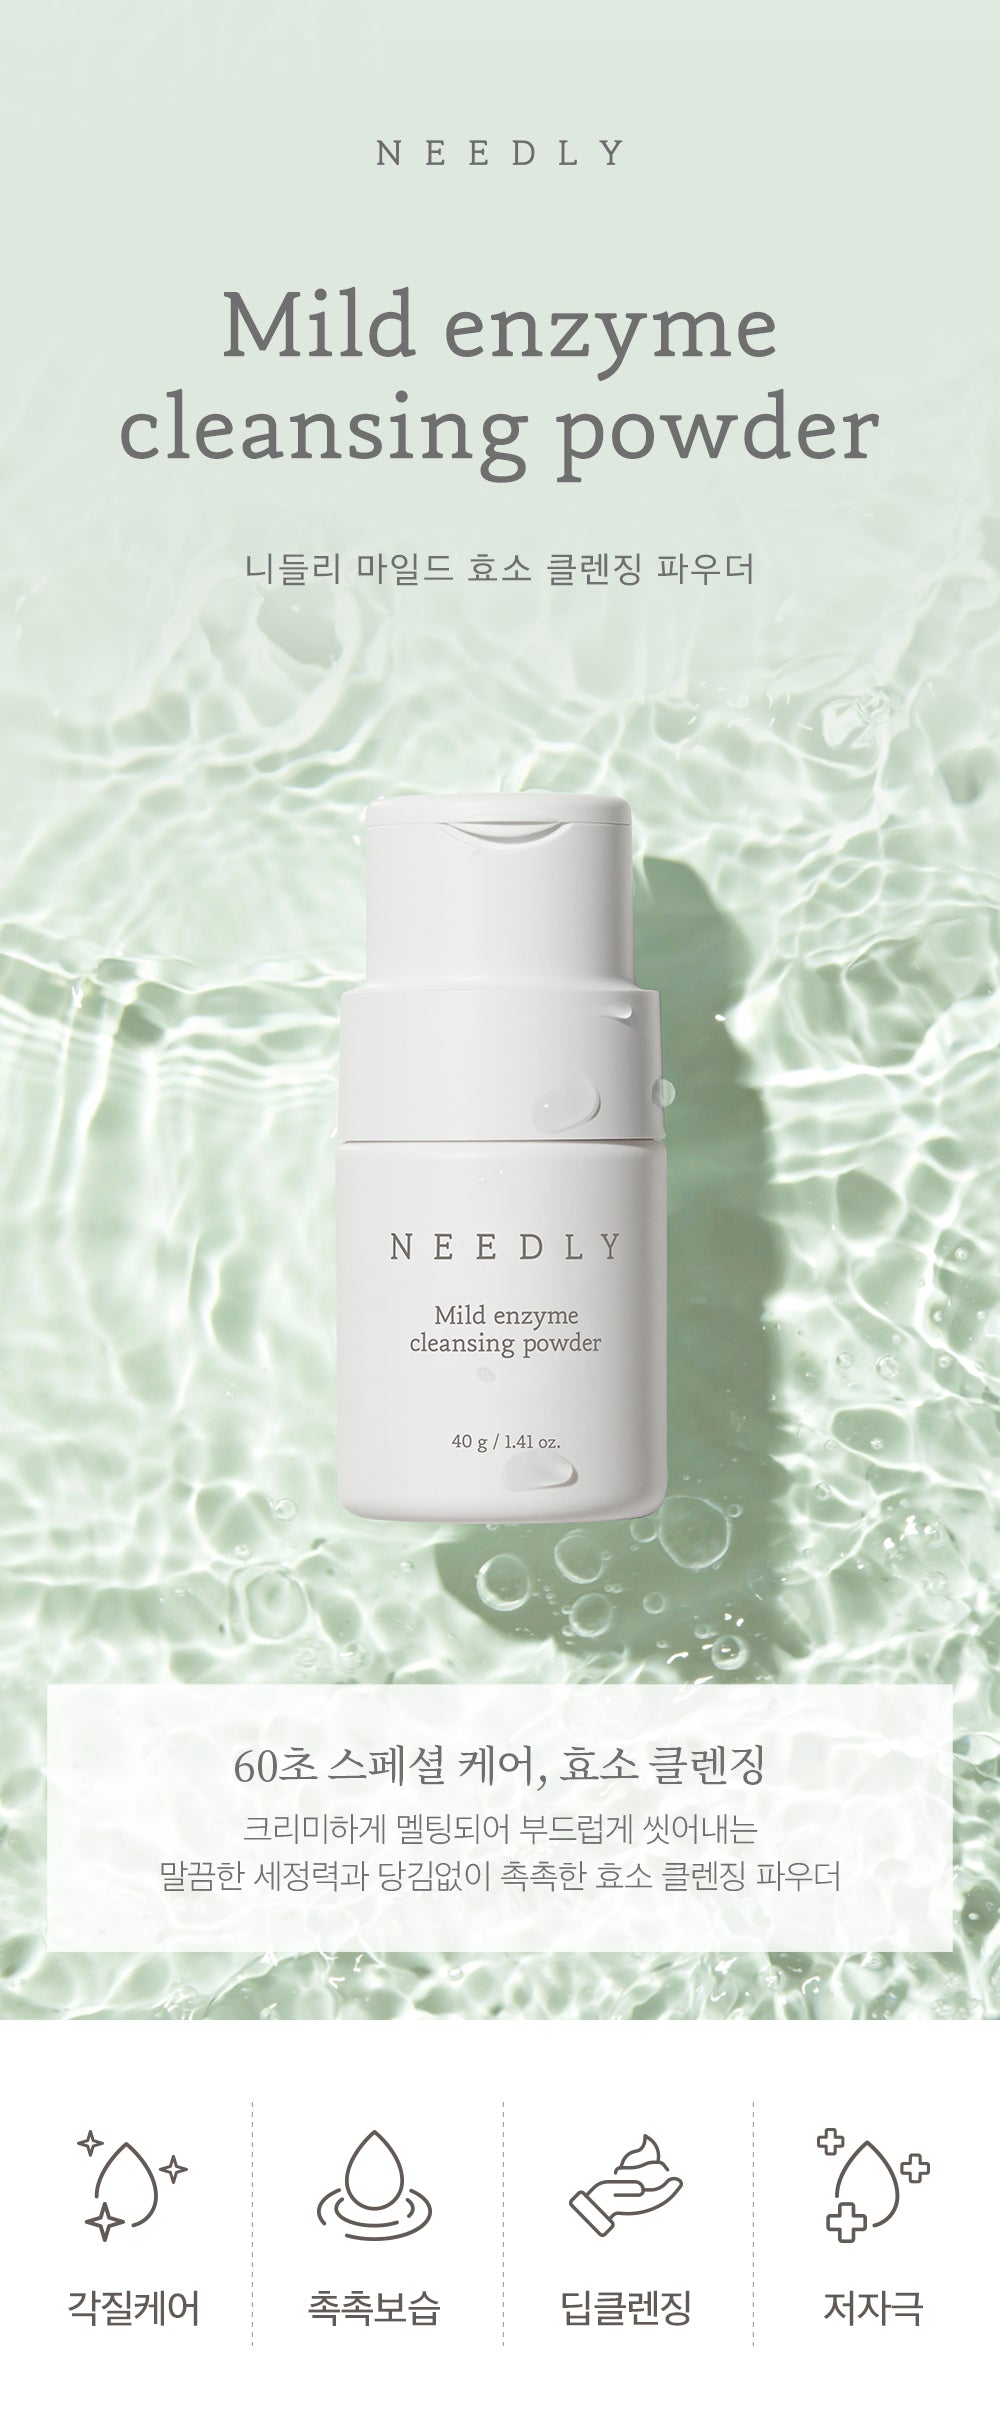 NEEDLY_Mild Enzyme Cleansing Powder 40g_1